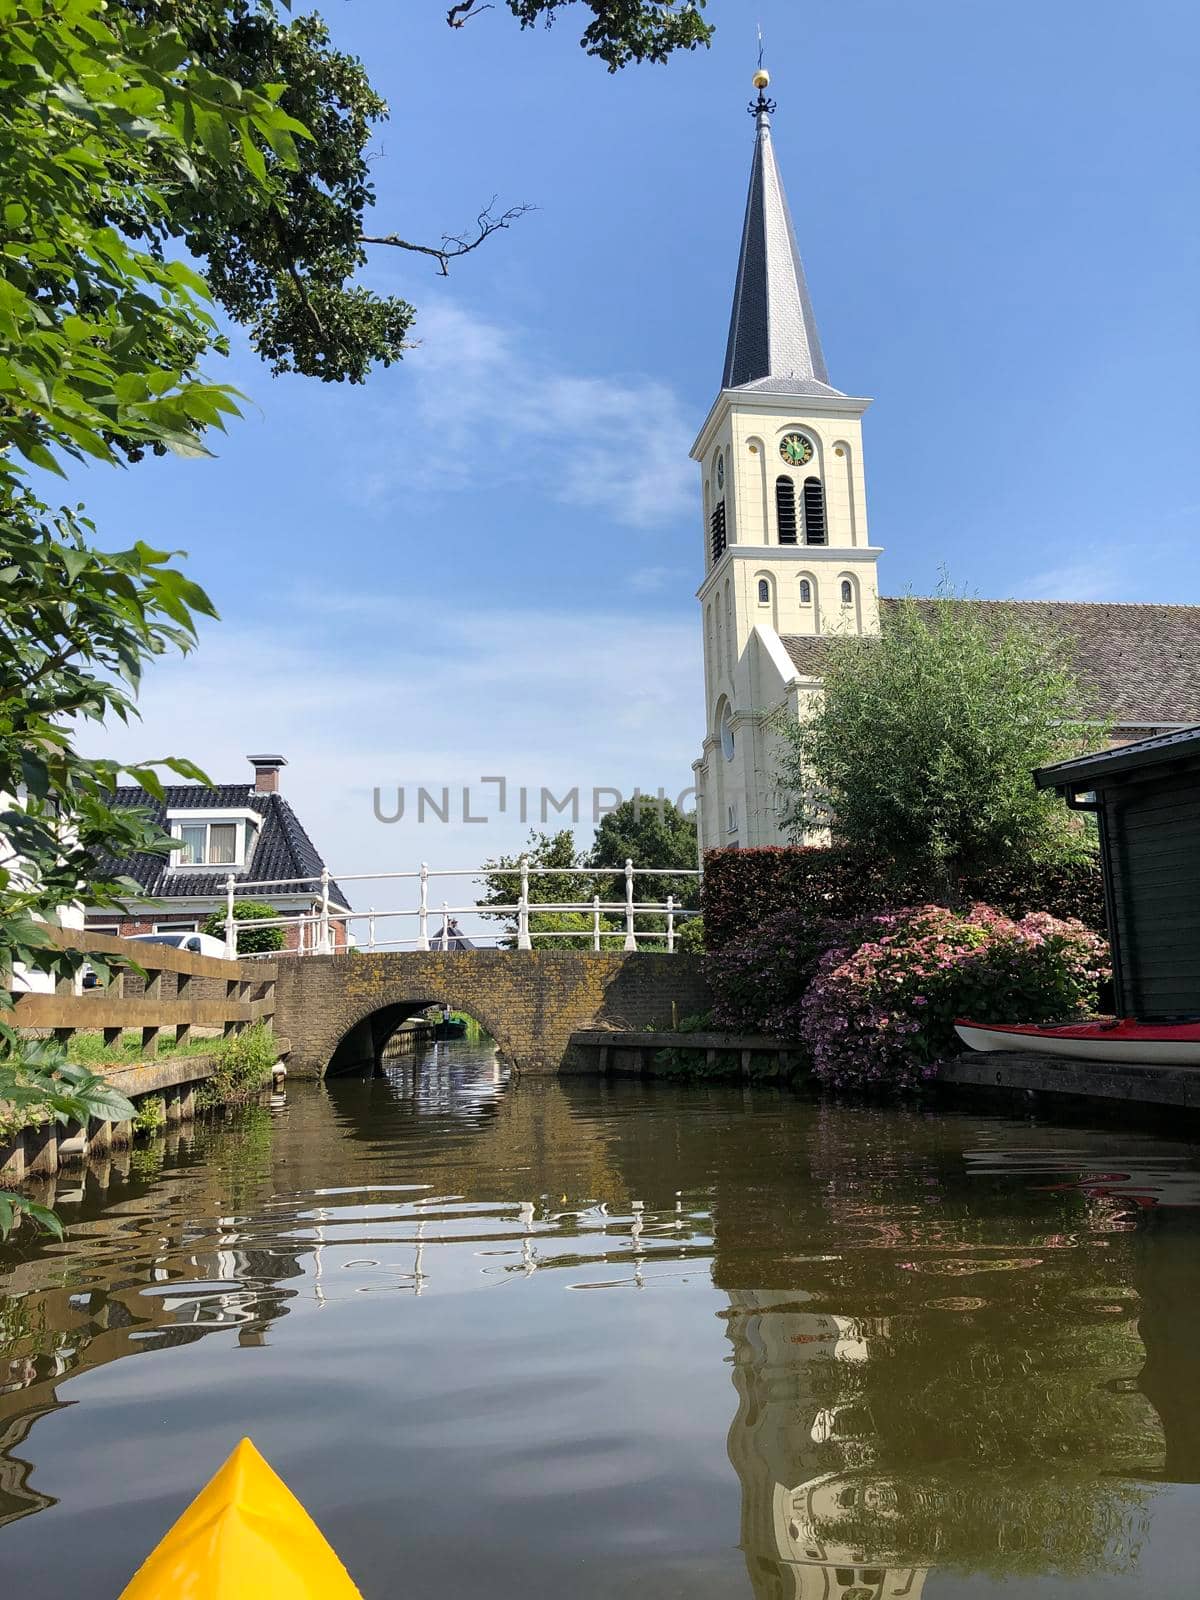 Canoeing through the town oosthem in Friesland, The Netherlands